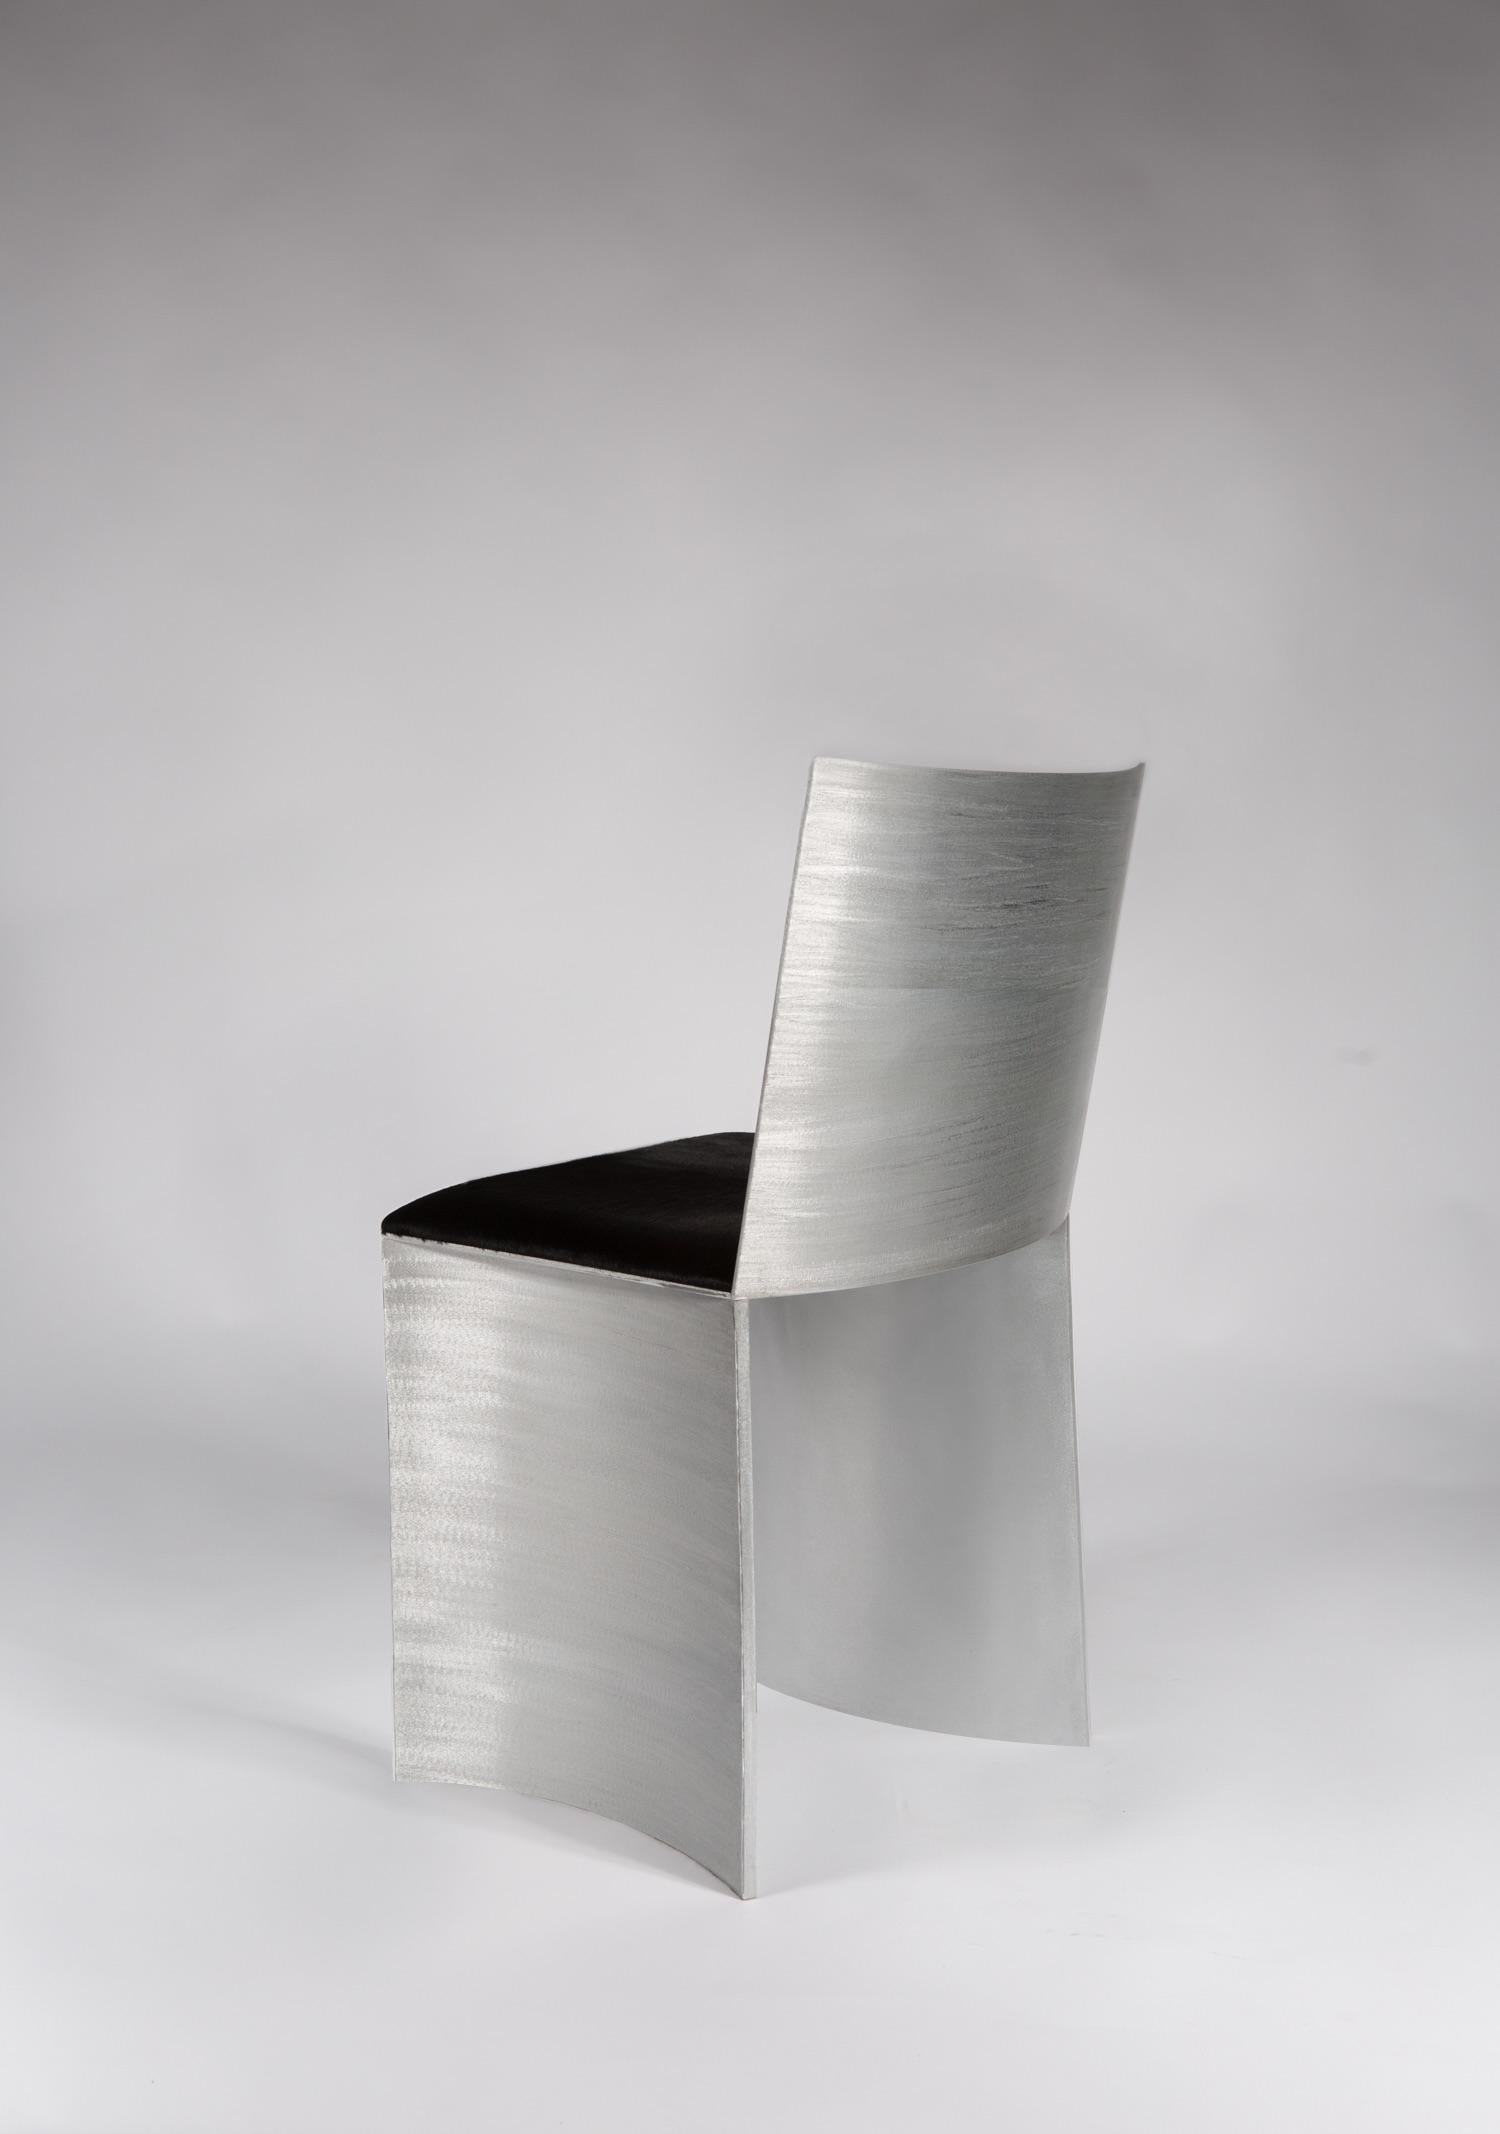 Hand-Crafted ISU Lowback Handcrafted Textured Satin Metal Chair by Soraya Osorio For Sale